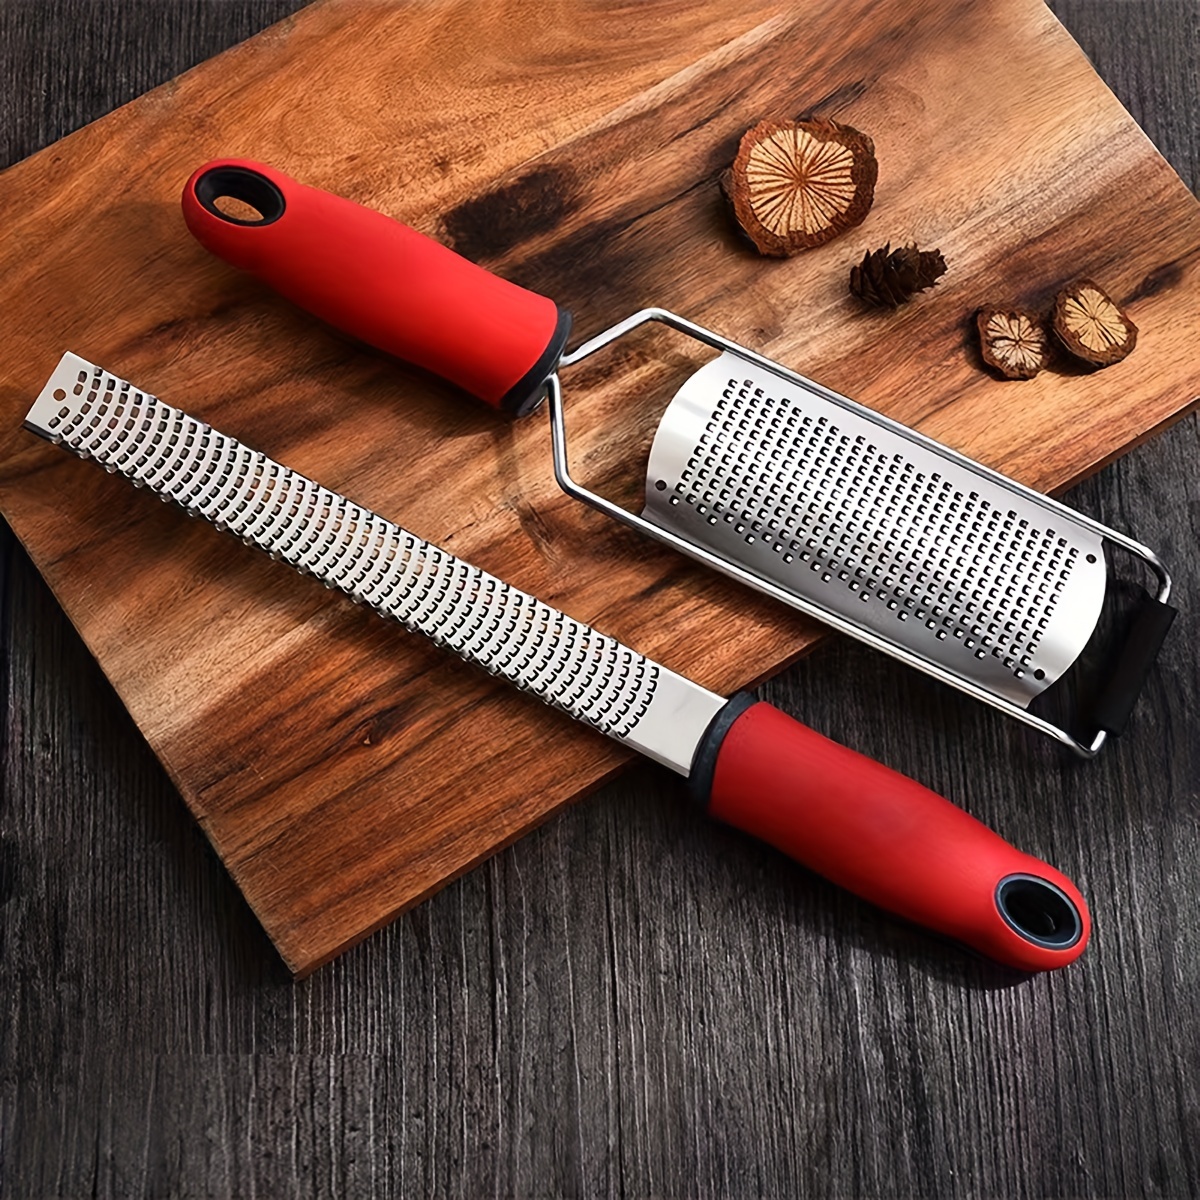 1pc Cheese Grater, Lemon Zester, Chocolate Grater With Small Tool